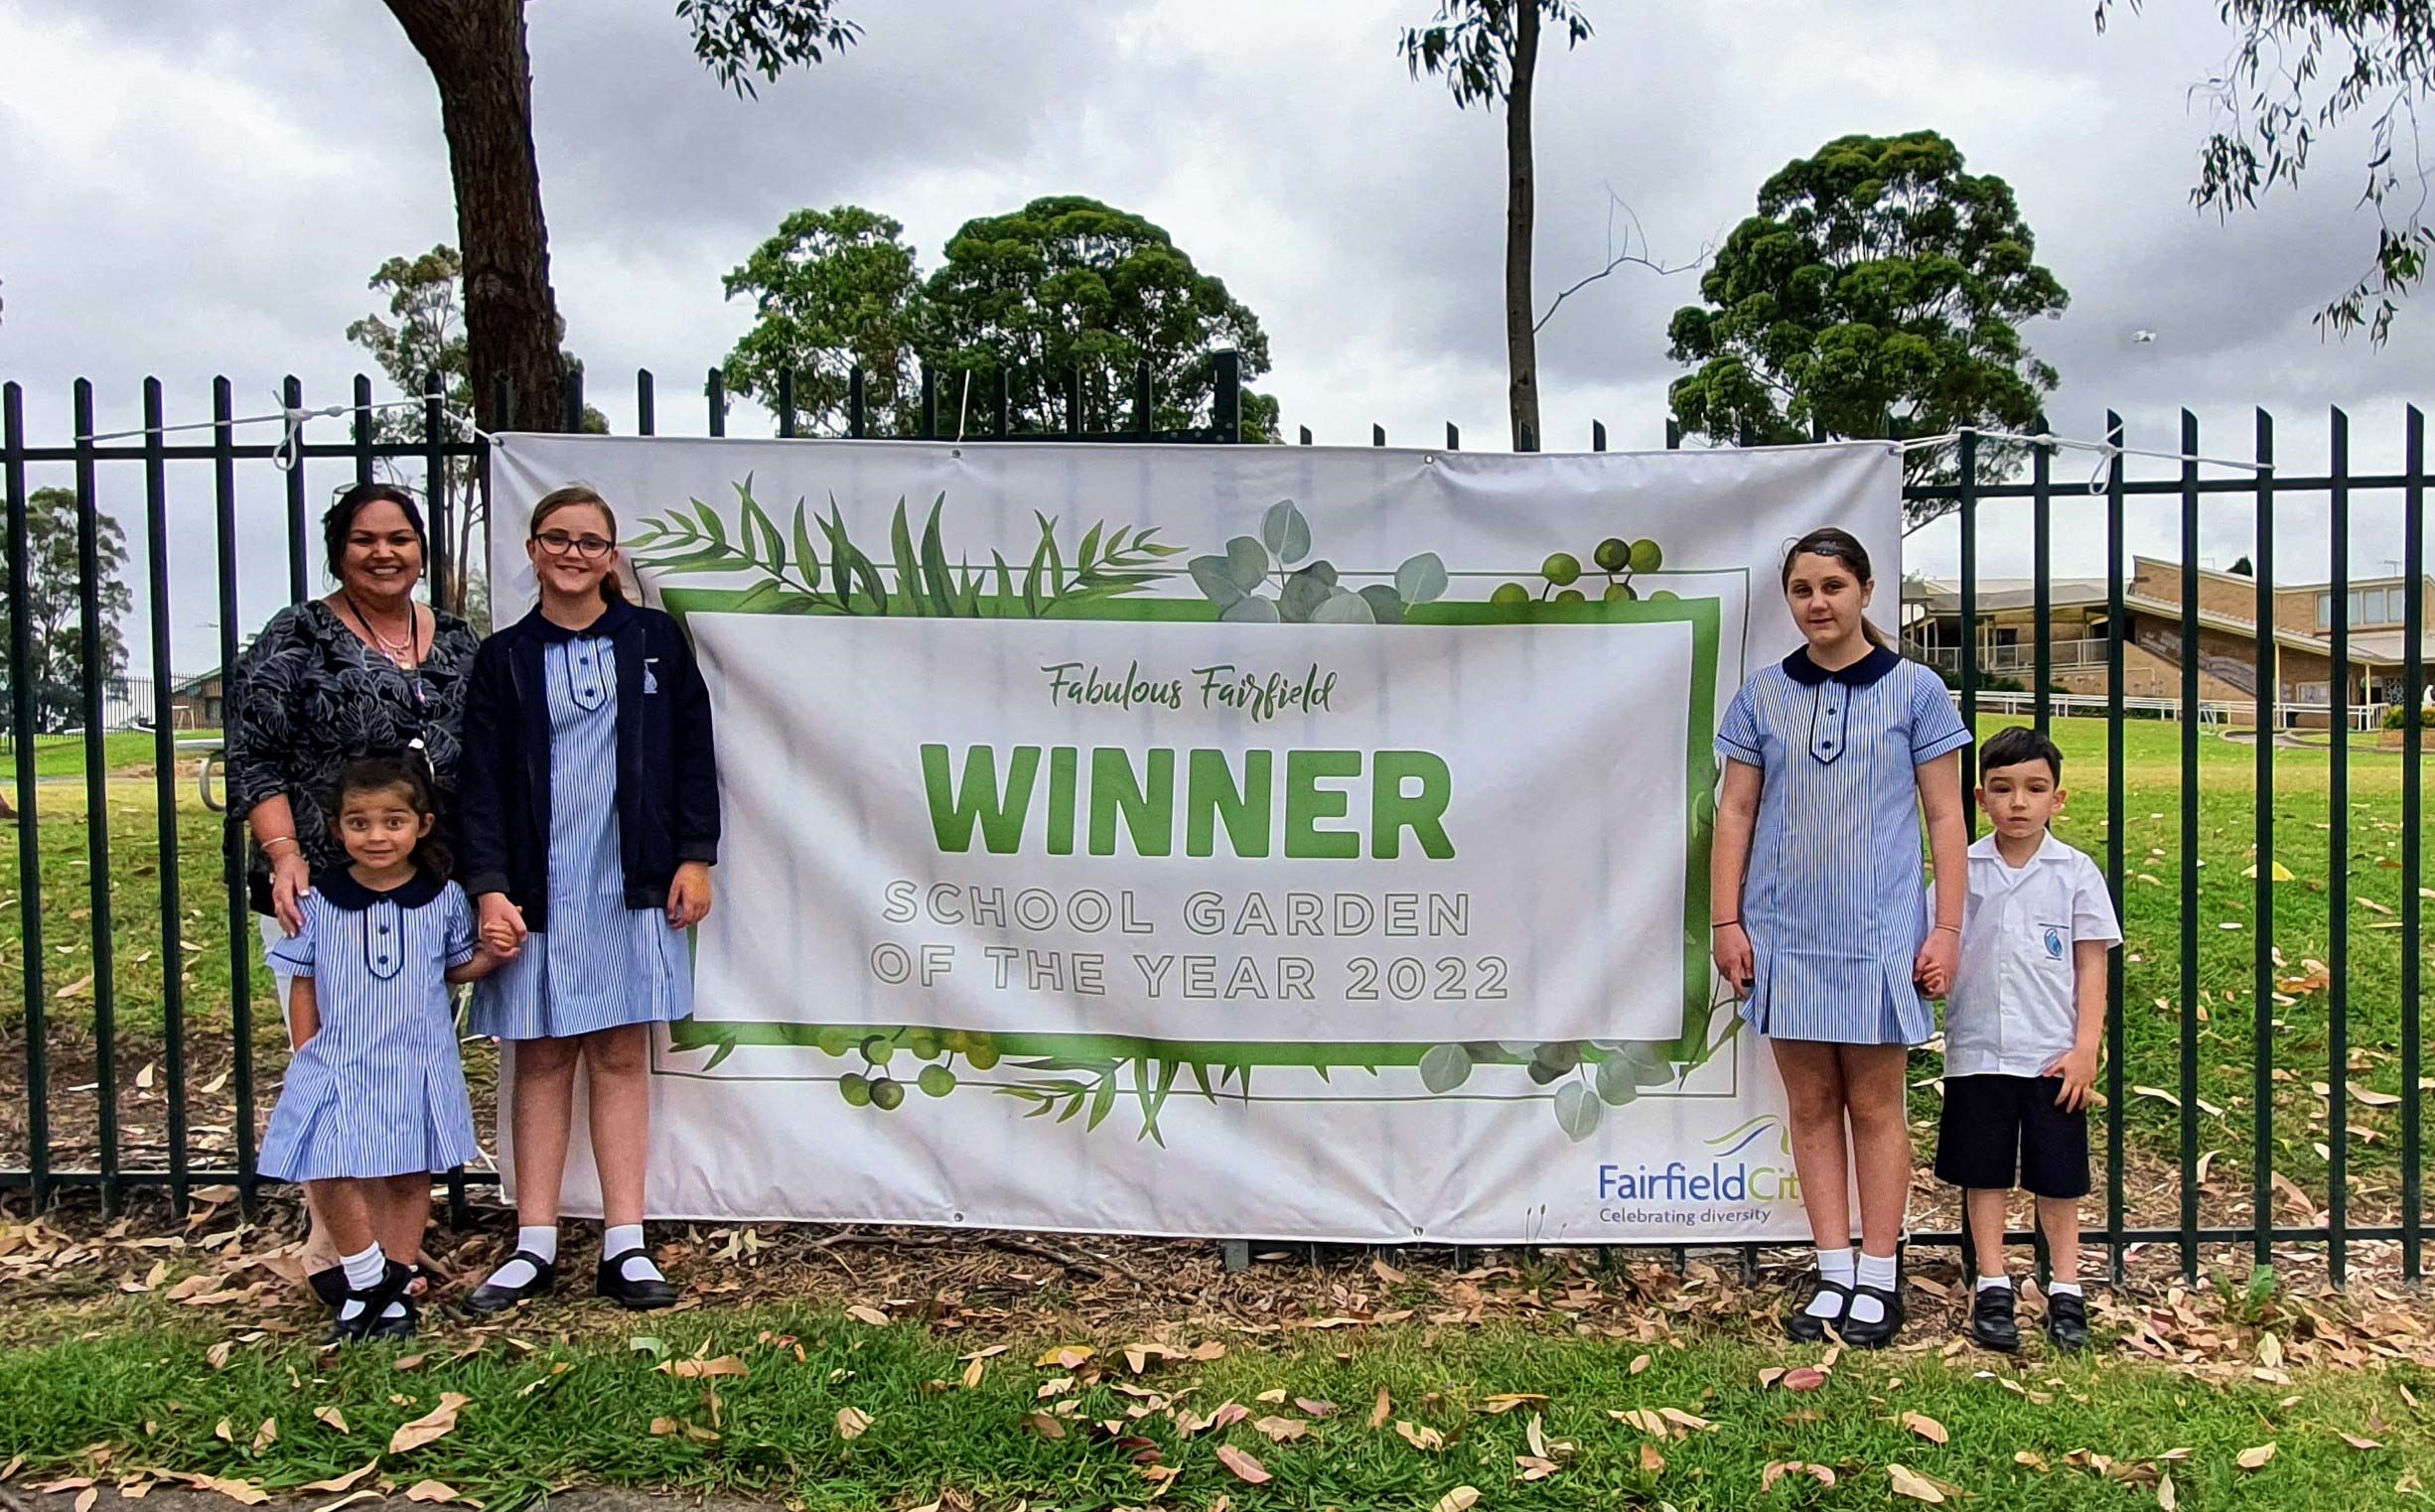 School Garden of the Year - Marion Catholic Primary School students with banner